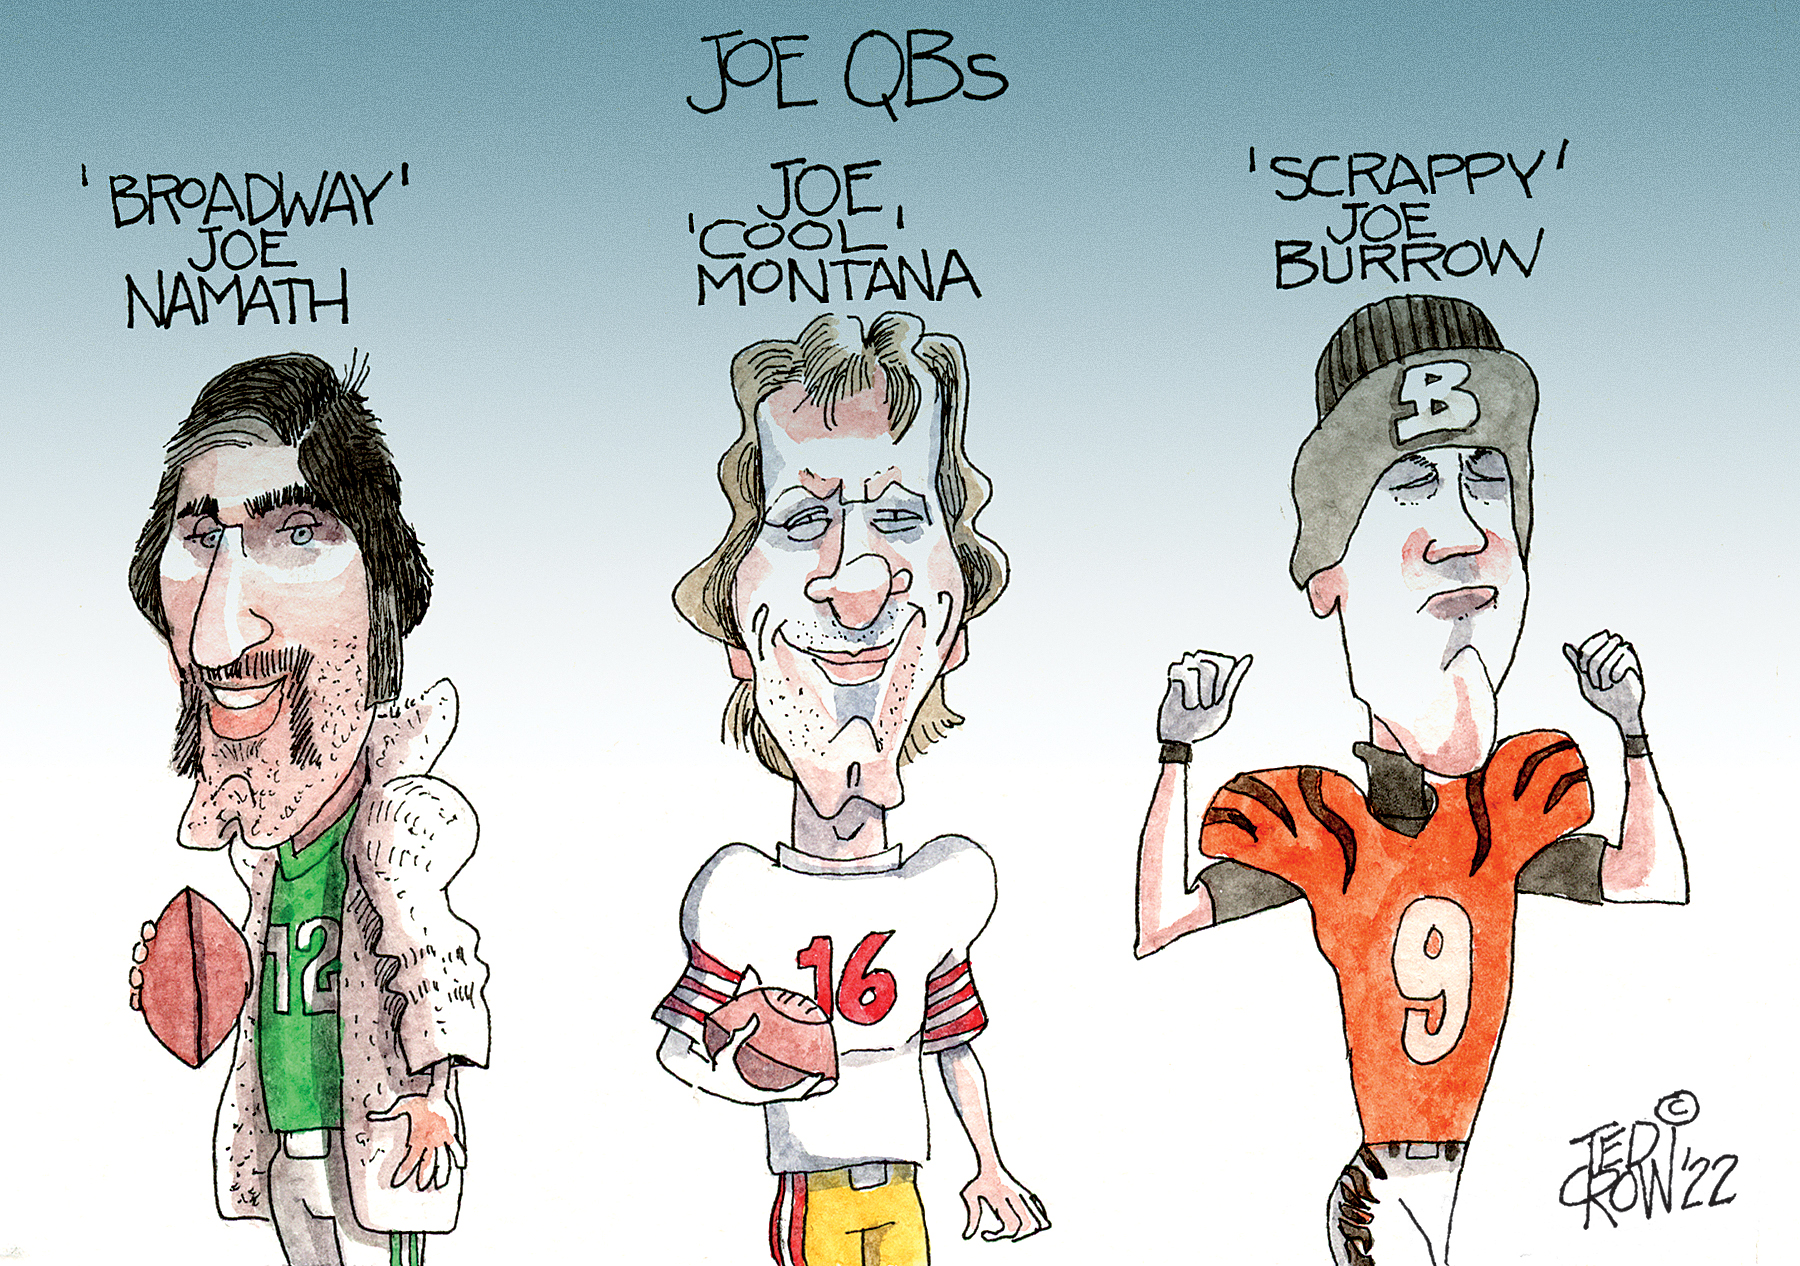 Cincinnati's Burrow inviting comparisons to two other QBs named